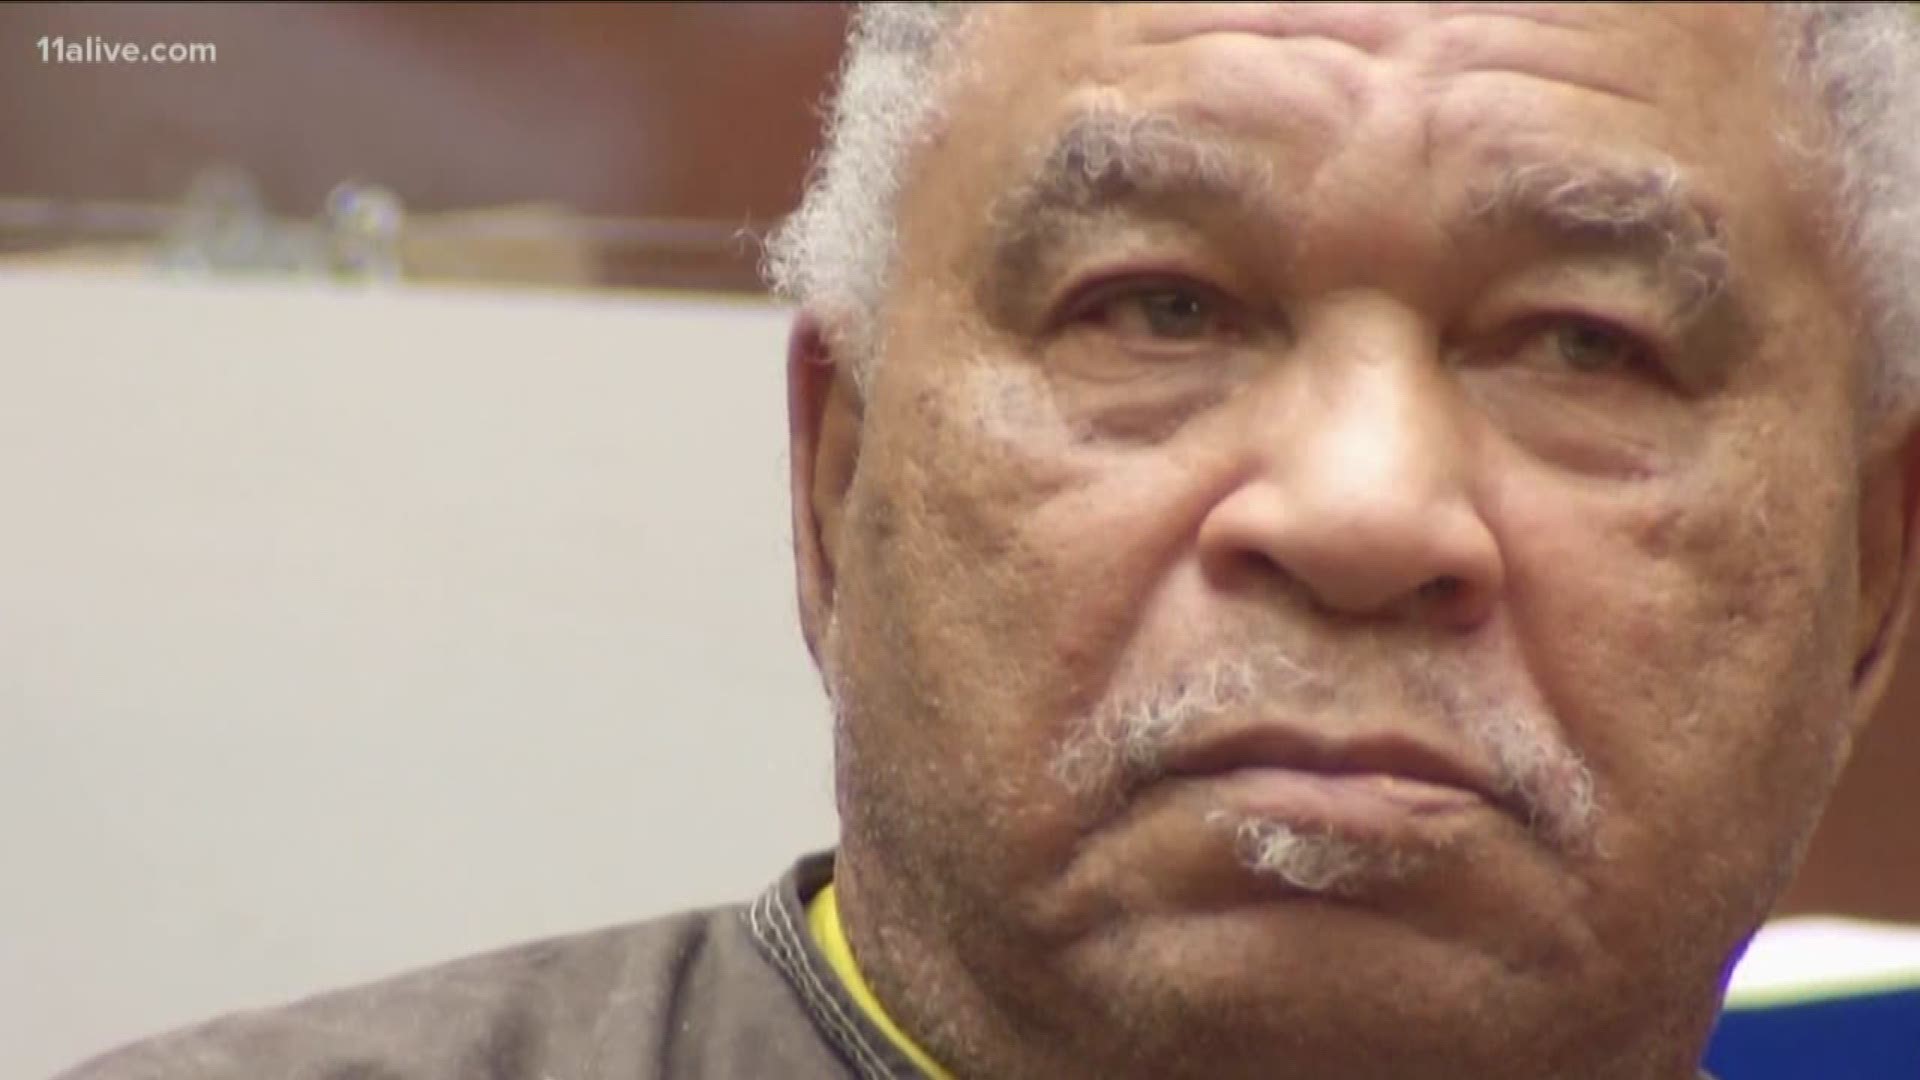 If found to be true, Samuel Little could be one of the most prolific murderers in American history. We spoke to the brother of one victim.